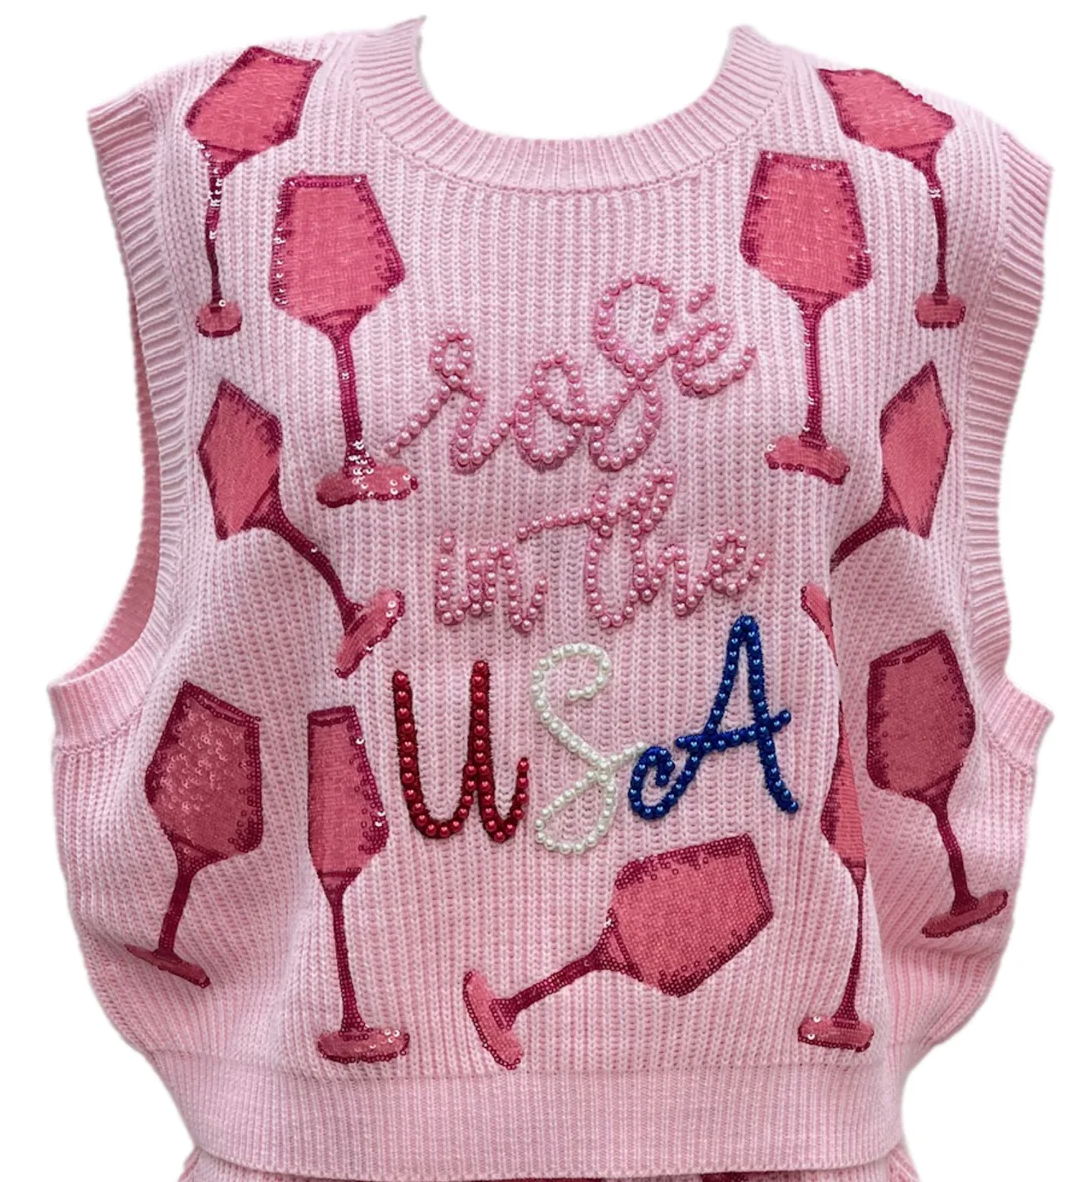 'ROSE’ IN THE USA' QUEEN OF SPARKLES VEST